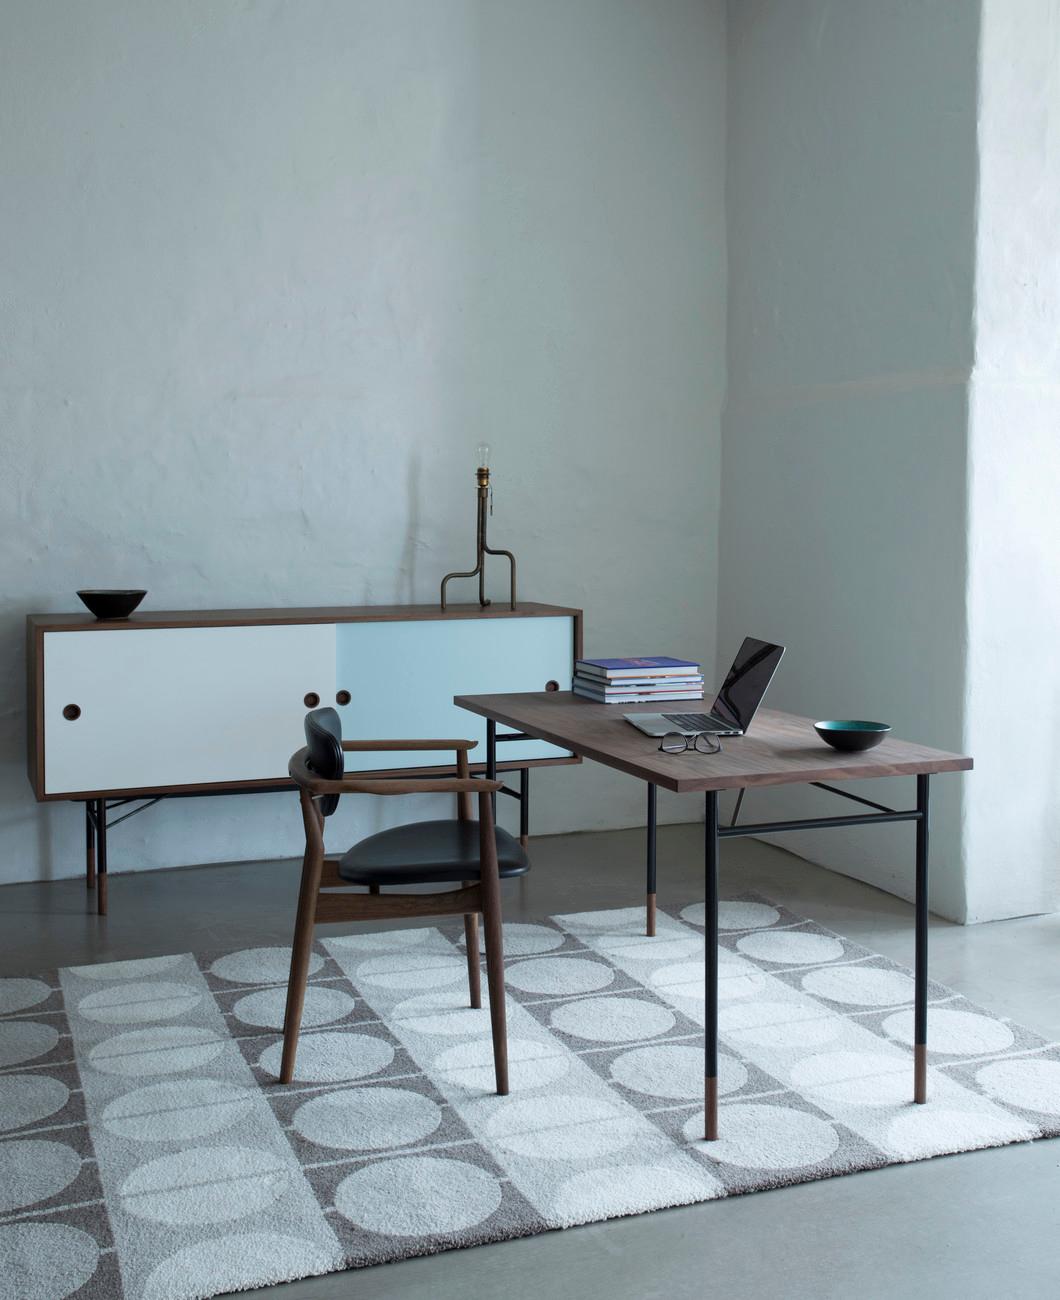 Finn Juhl Sideboard in Wood and Cold Colors Whit Unit Tray 3